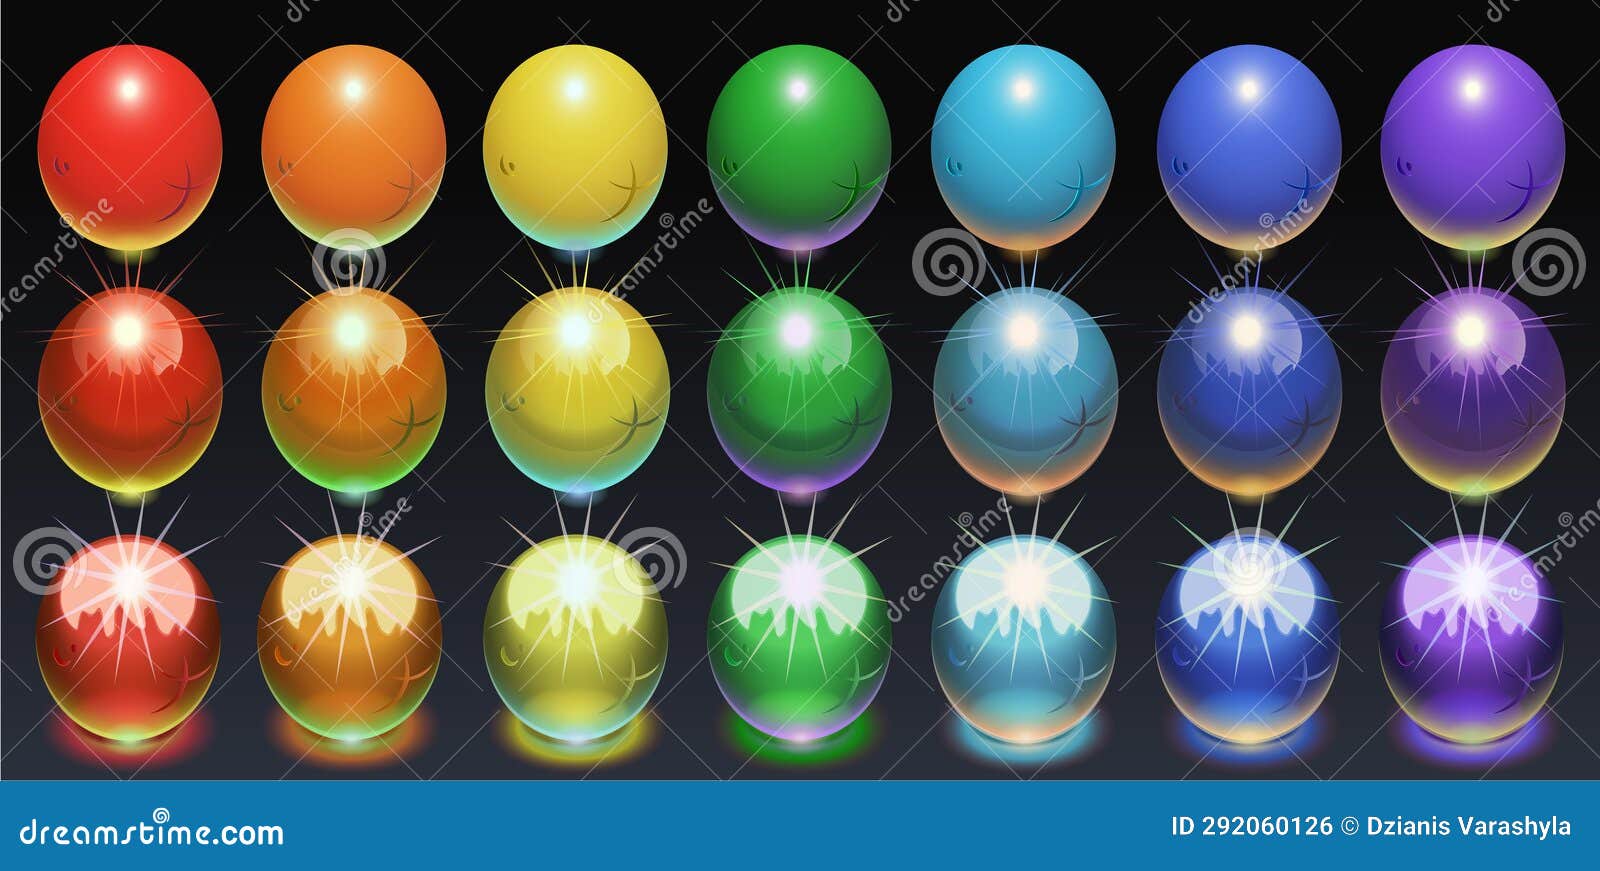 multicolored balls on a dark background, illuminated from below, made of matte, metal and glass material